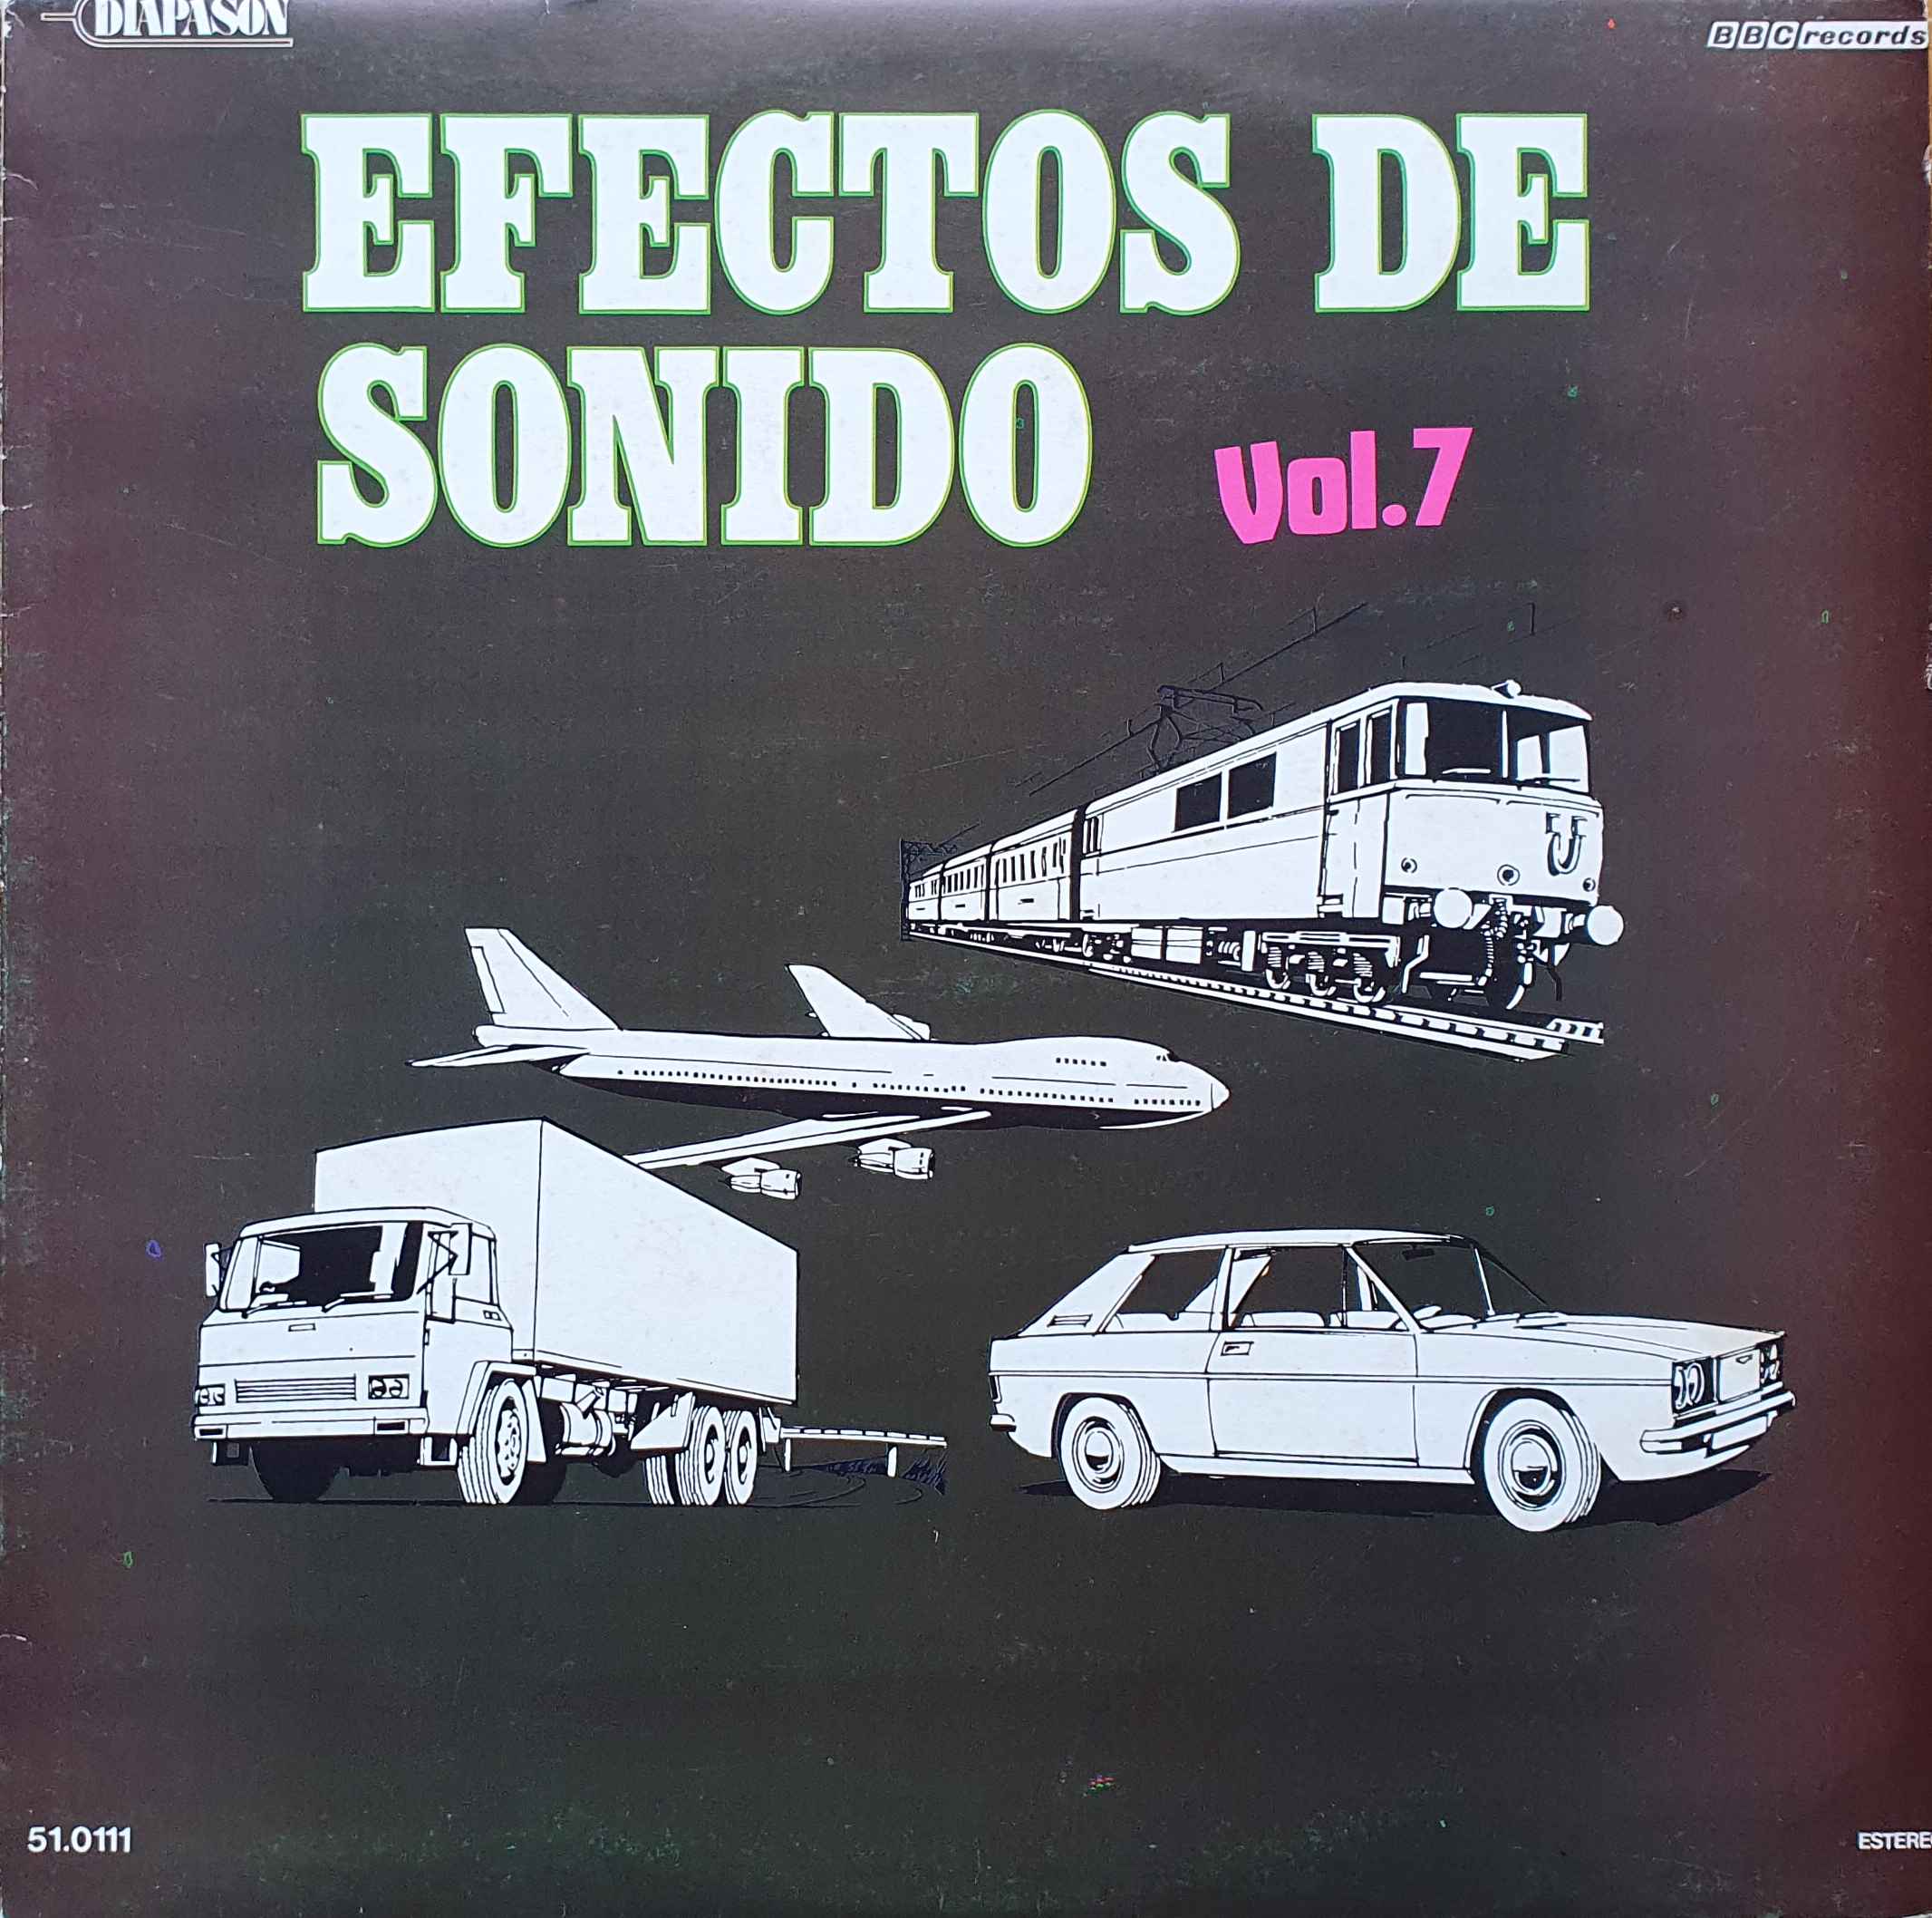 Picture of 51.0111 Efectos De Sonido No 7 (Spanish import) by artist Various from the BBC albums - Records and Tapes library